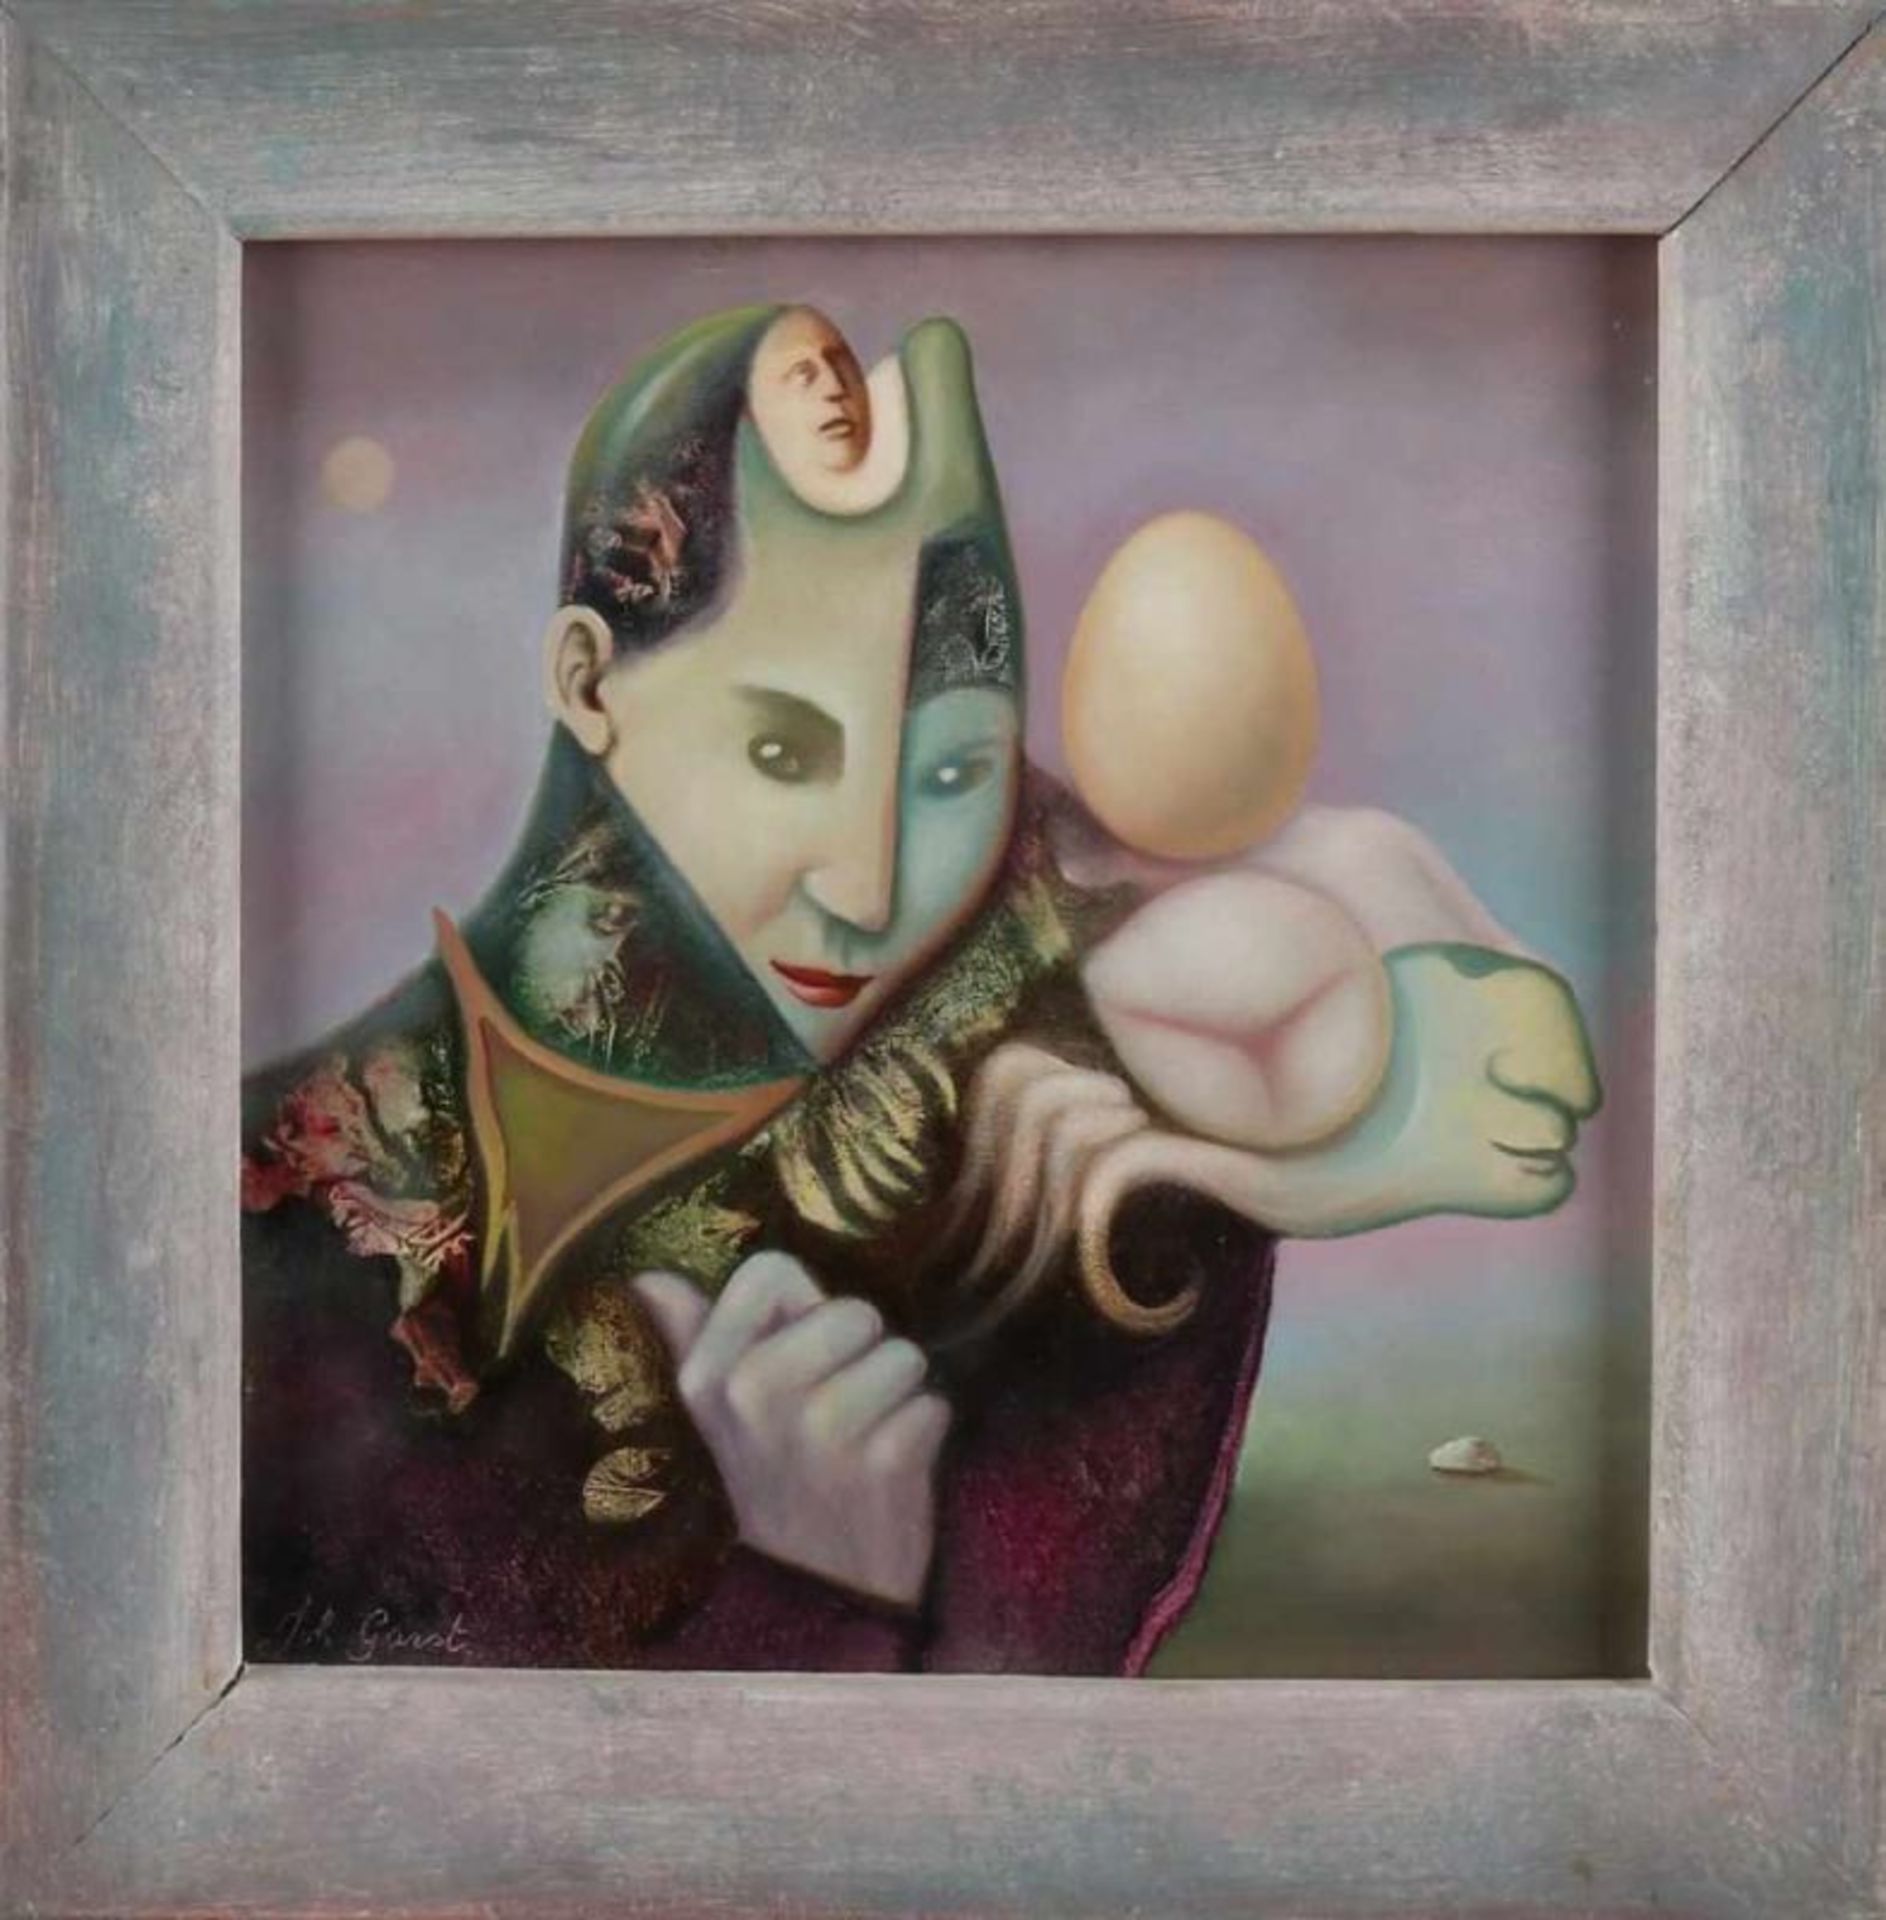 John Garst. 1950 -. Surrealistic Fig. Oil paint on panel. Dimensions: H 27 x W 27 cm. In good